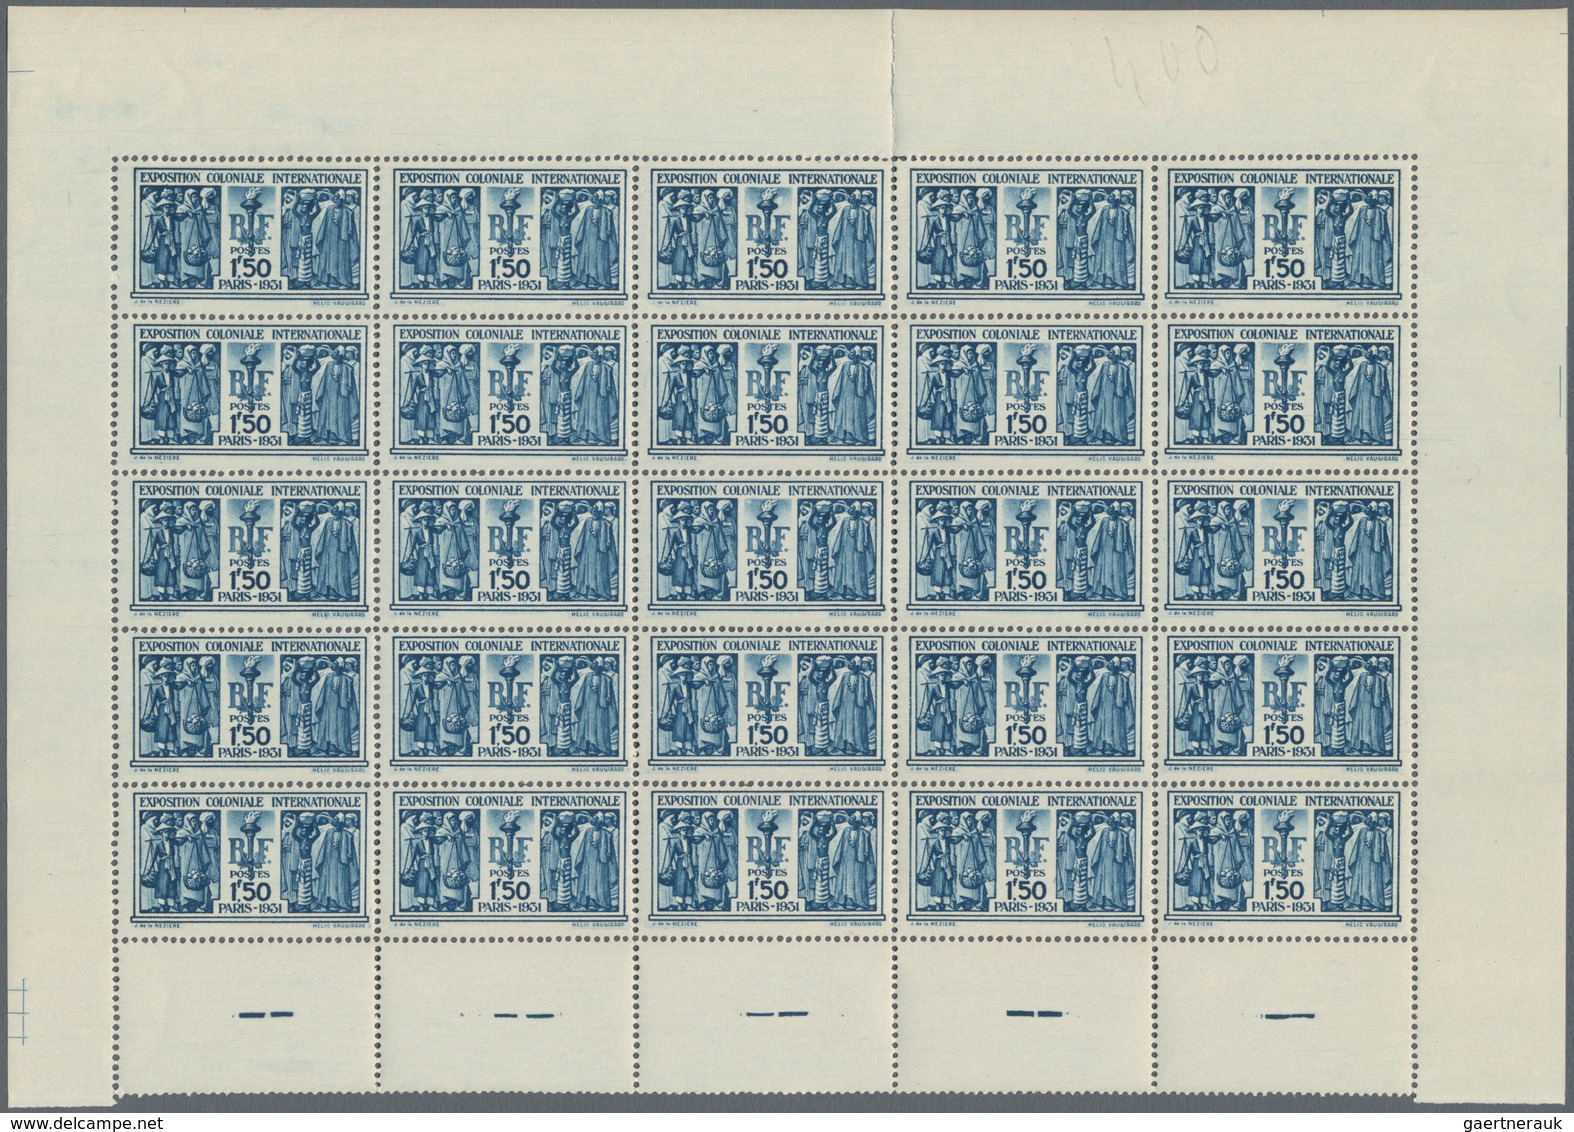 Frankreich: 1931, Colonial Exhibition, 1.50fr. Blue, Lot Of 50 Stamps (two Panes Of 25), Mint Never - Collections